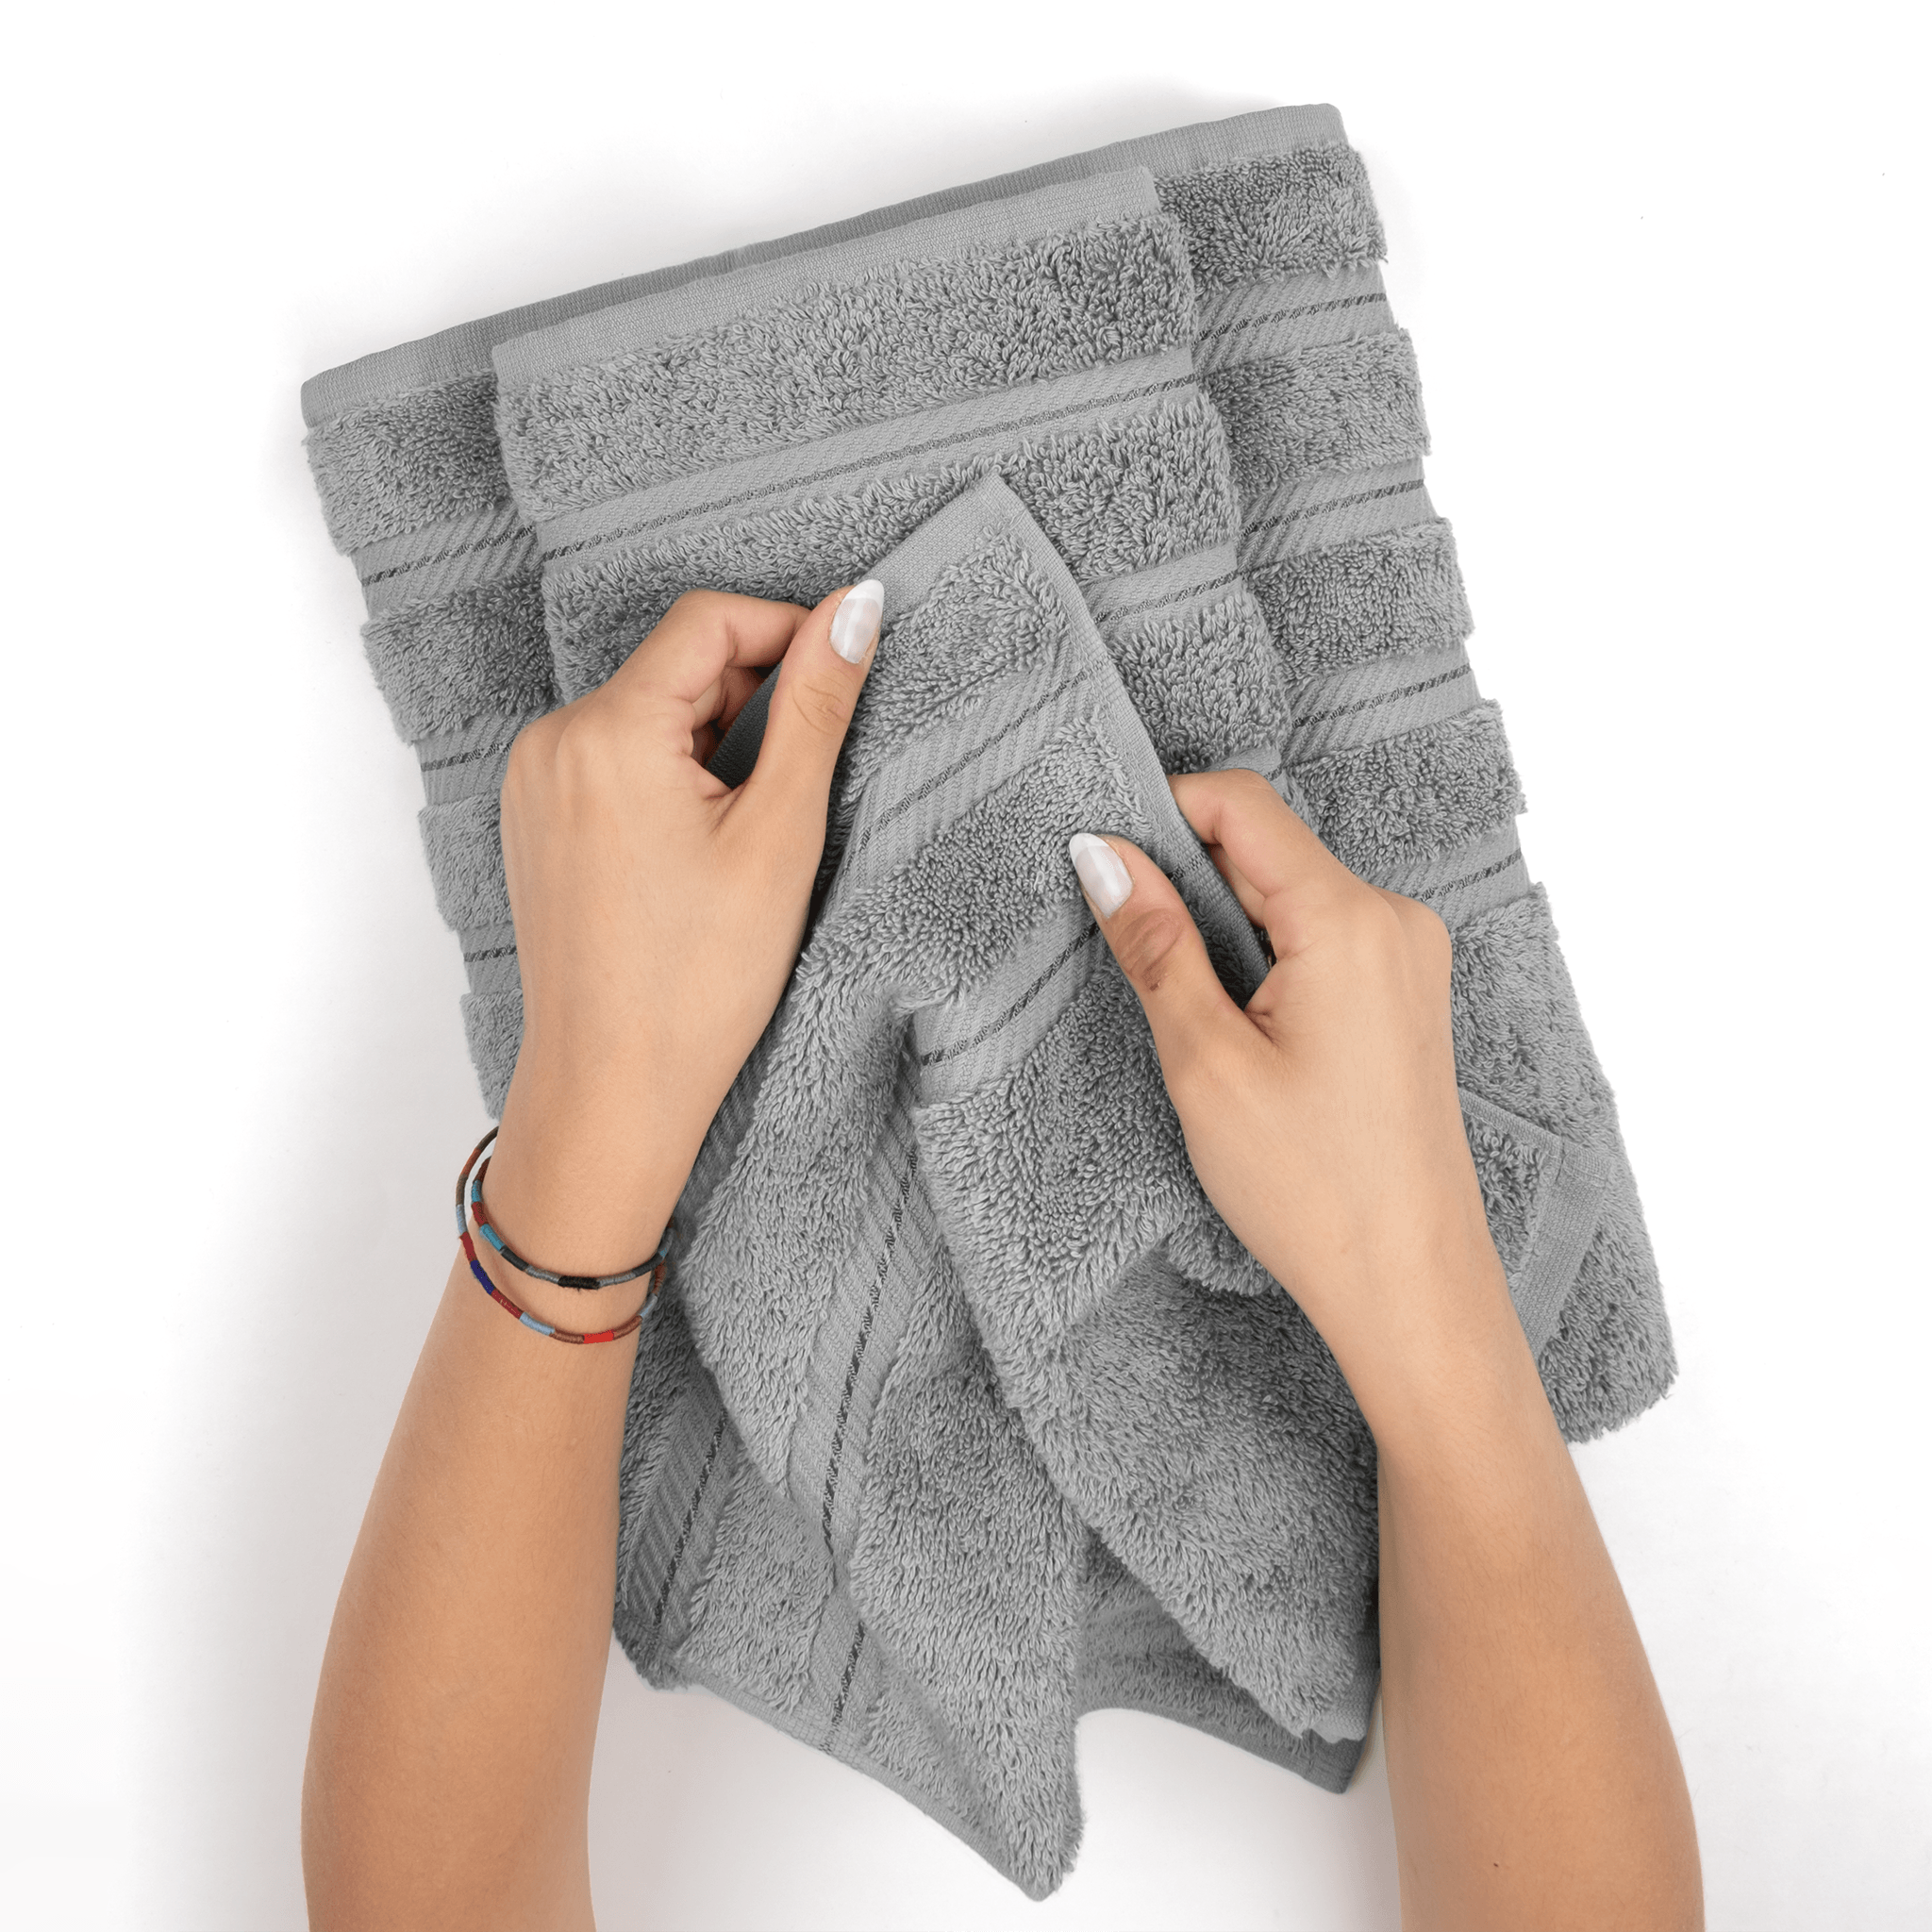 Luxury Thick Bath Towels 29.5 x 13.8 Premium Bath Sheet/Ultra Soft,  Highly Absorbent Heavy Weight Combed Cotton (Grey) 